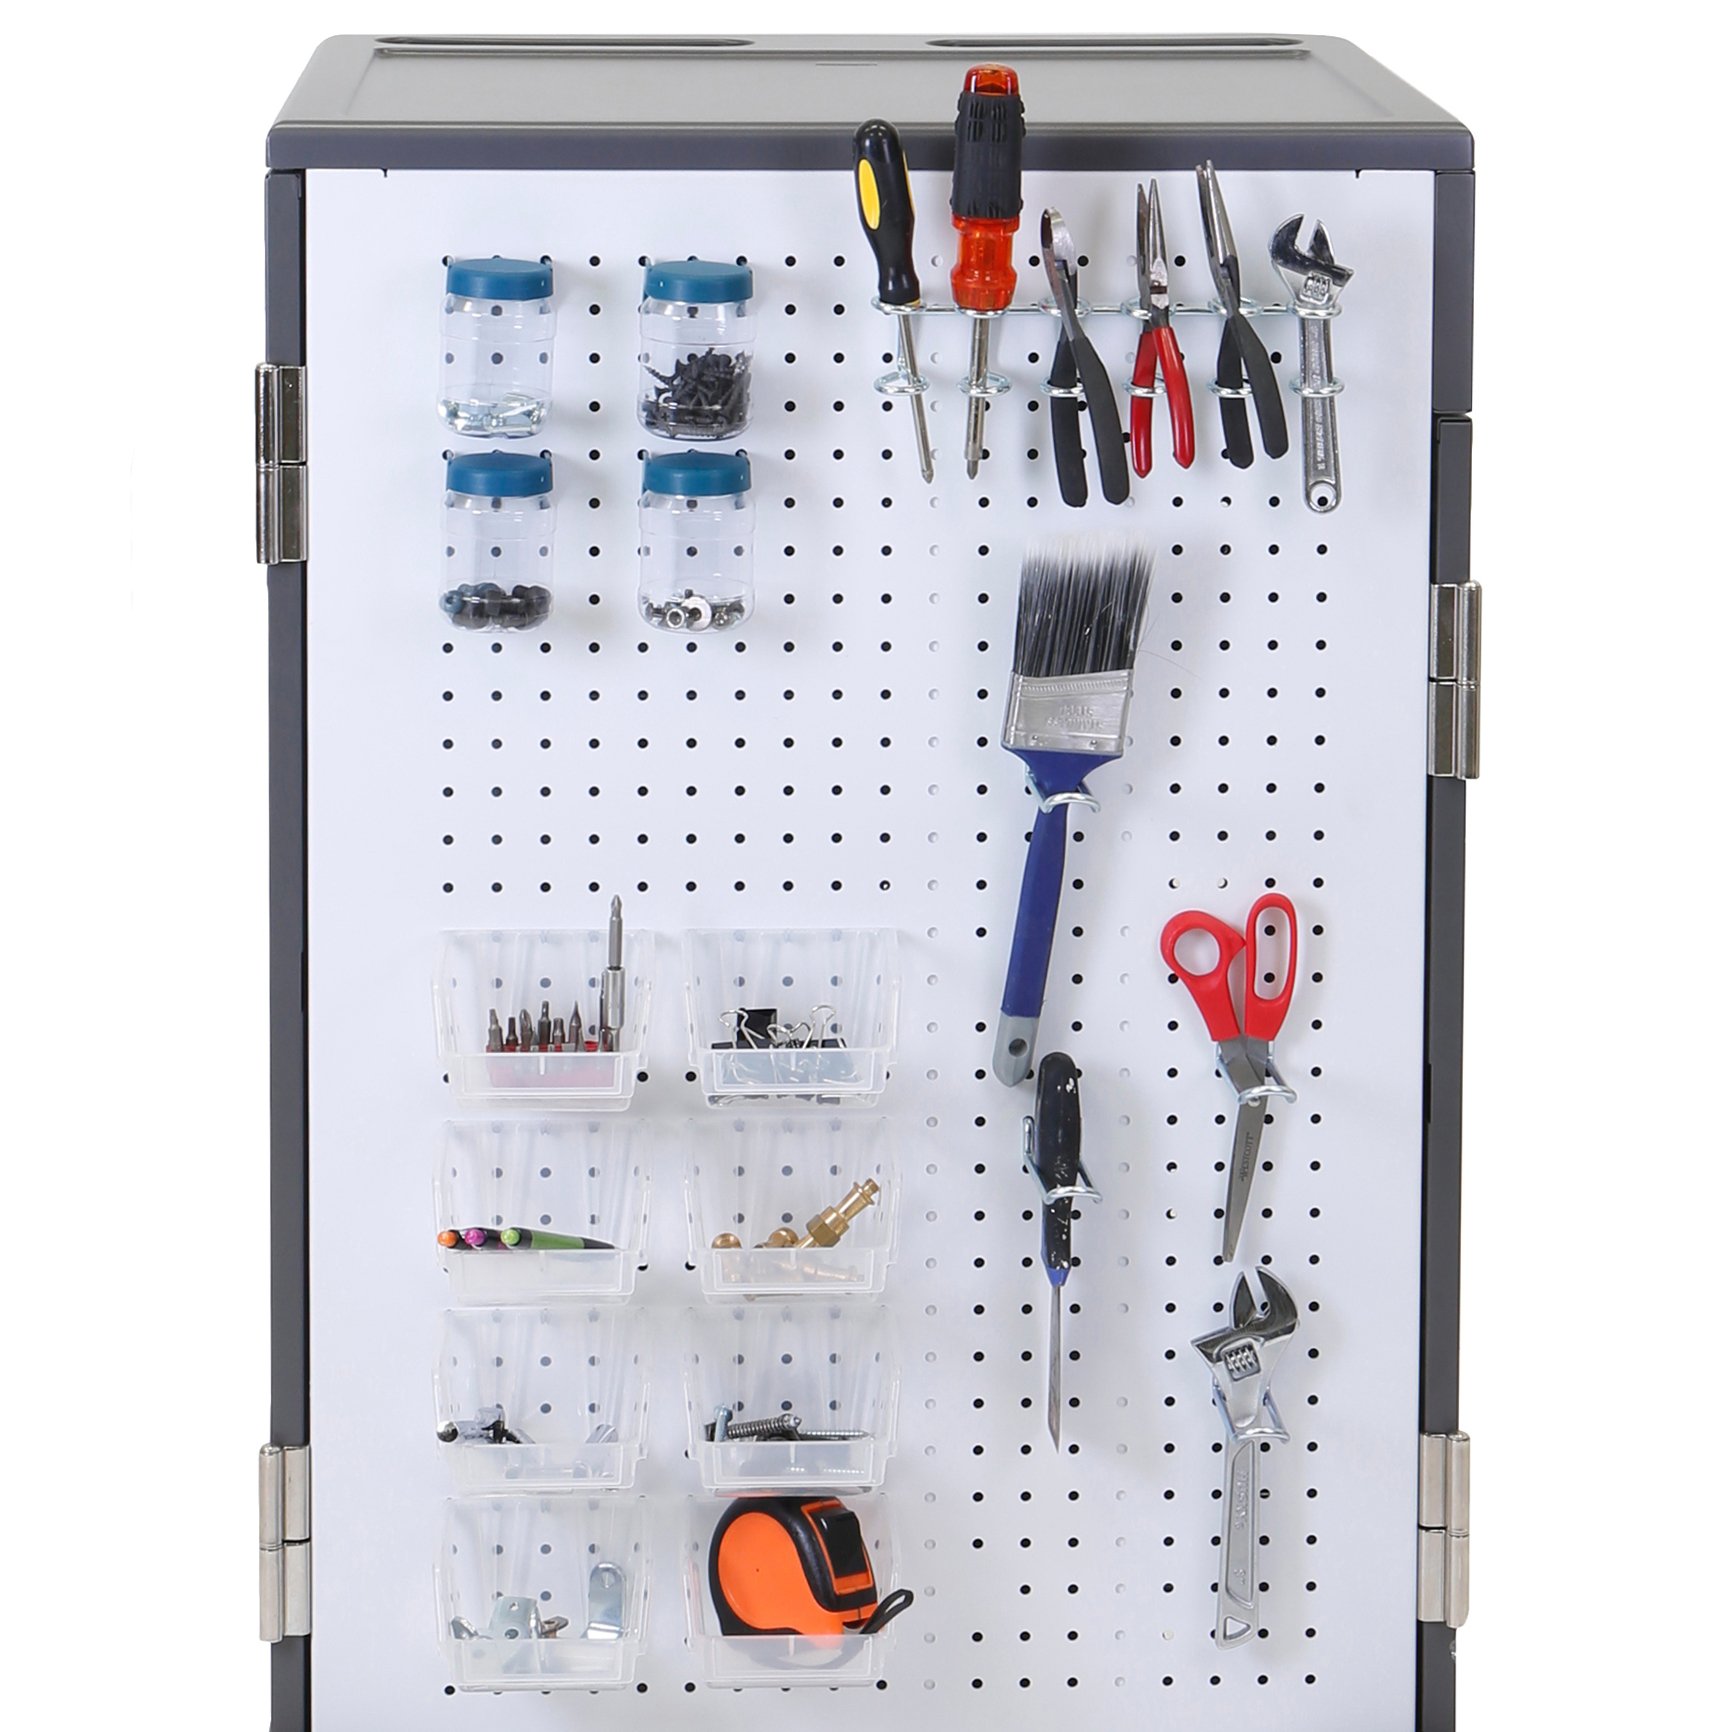 Easy storage includes bins, jars and loops for tools and supplies